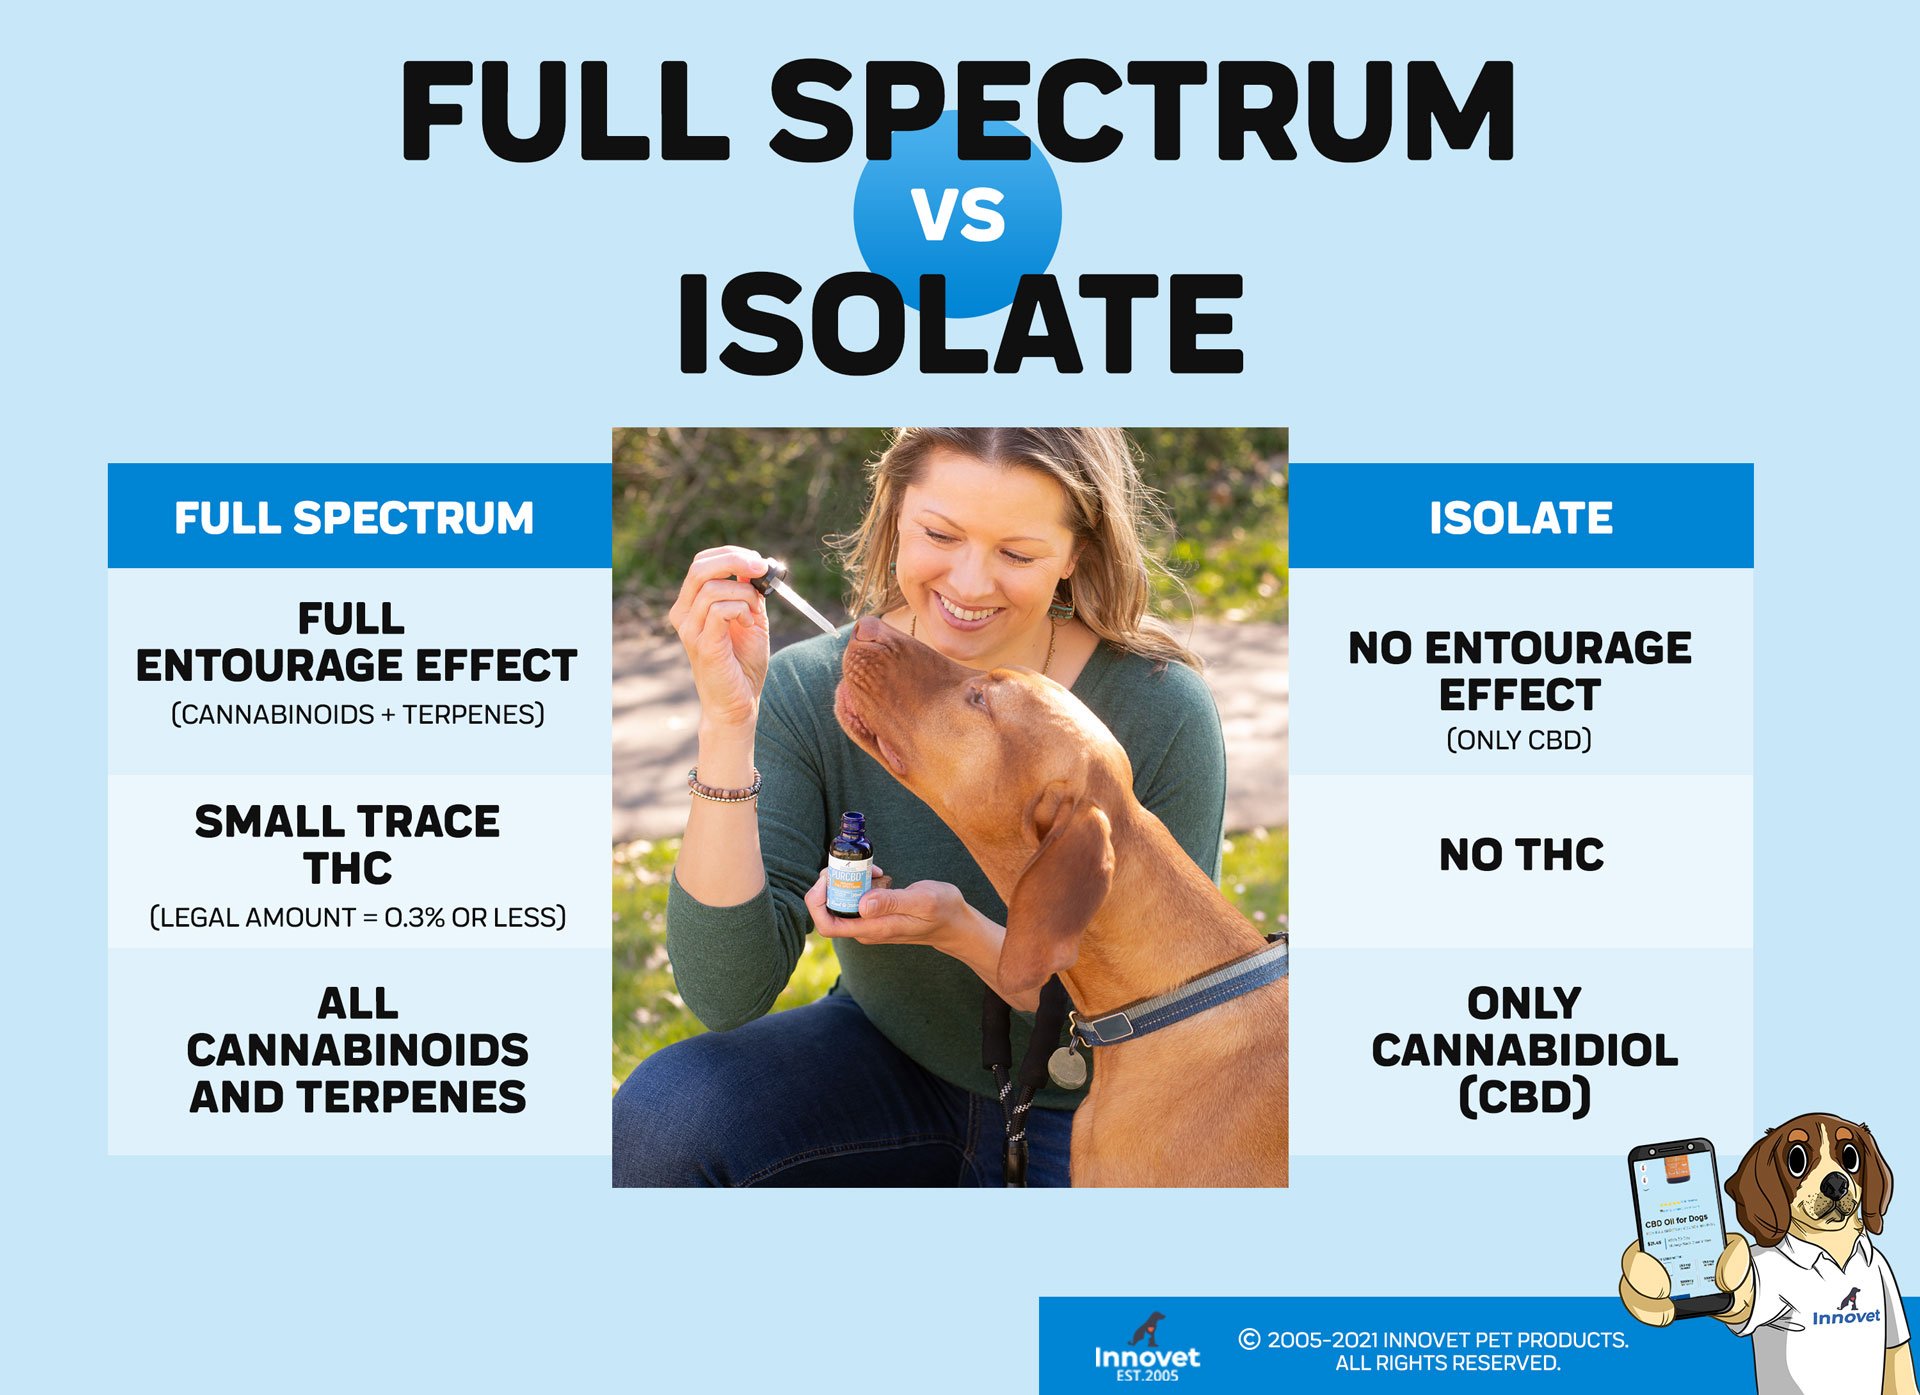 The differences between Full Spectrum and Isolate CBD Oil